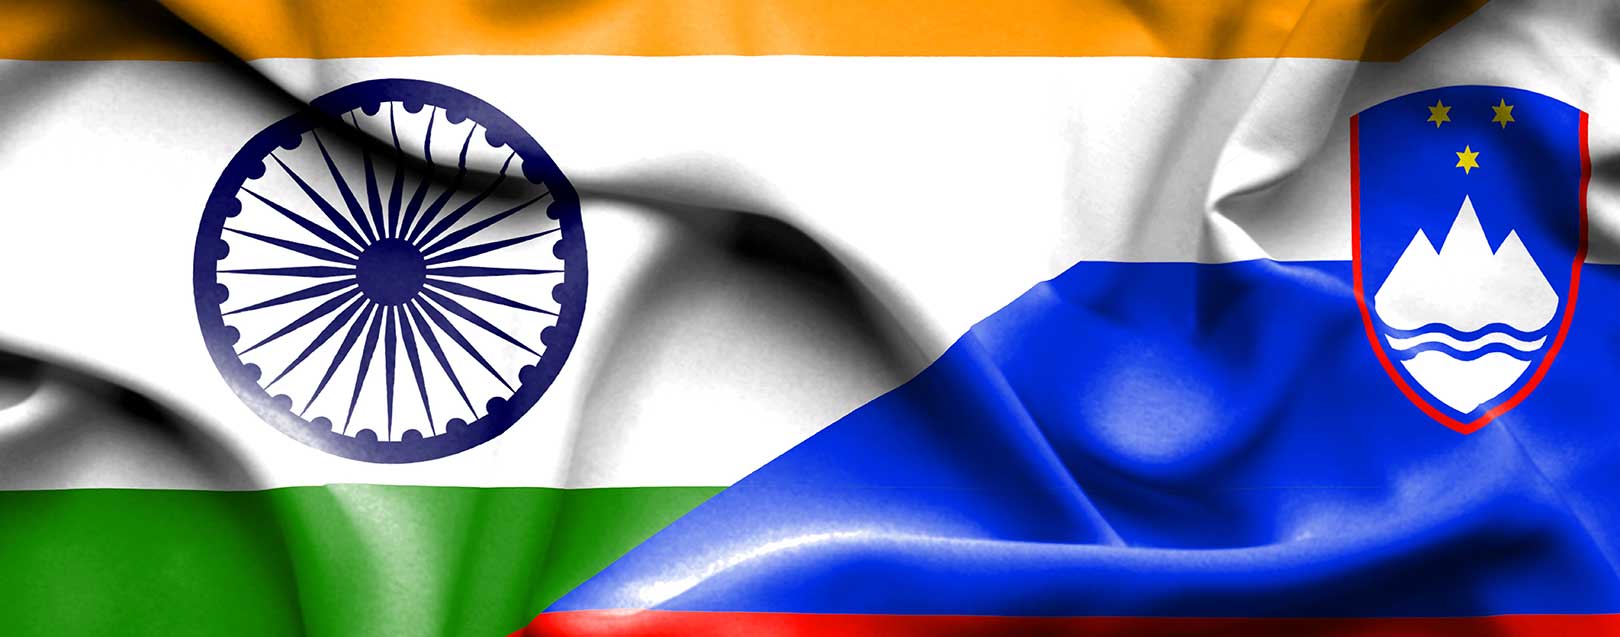 Slovenia asks Indian firms to invest, build business